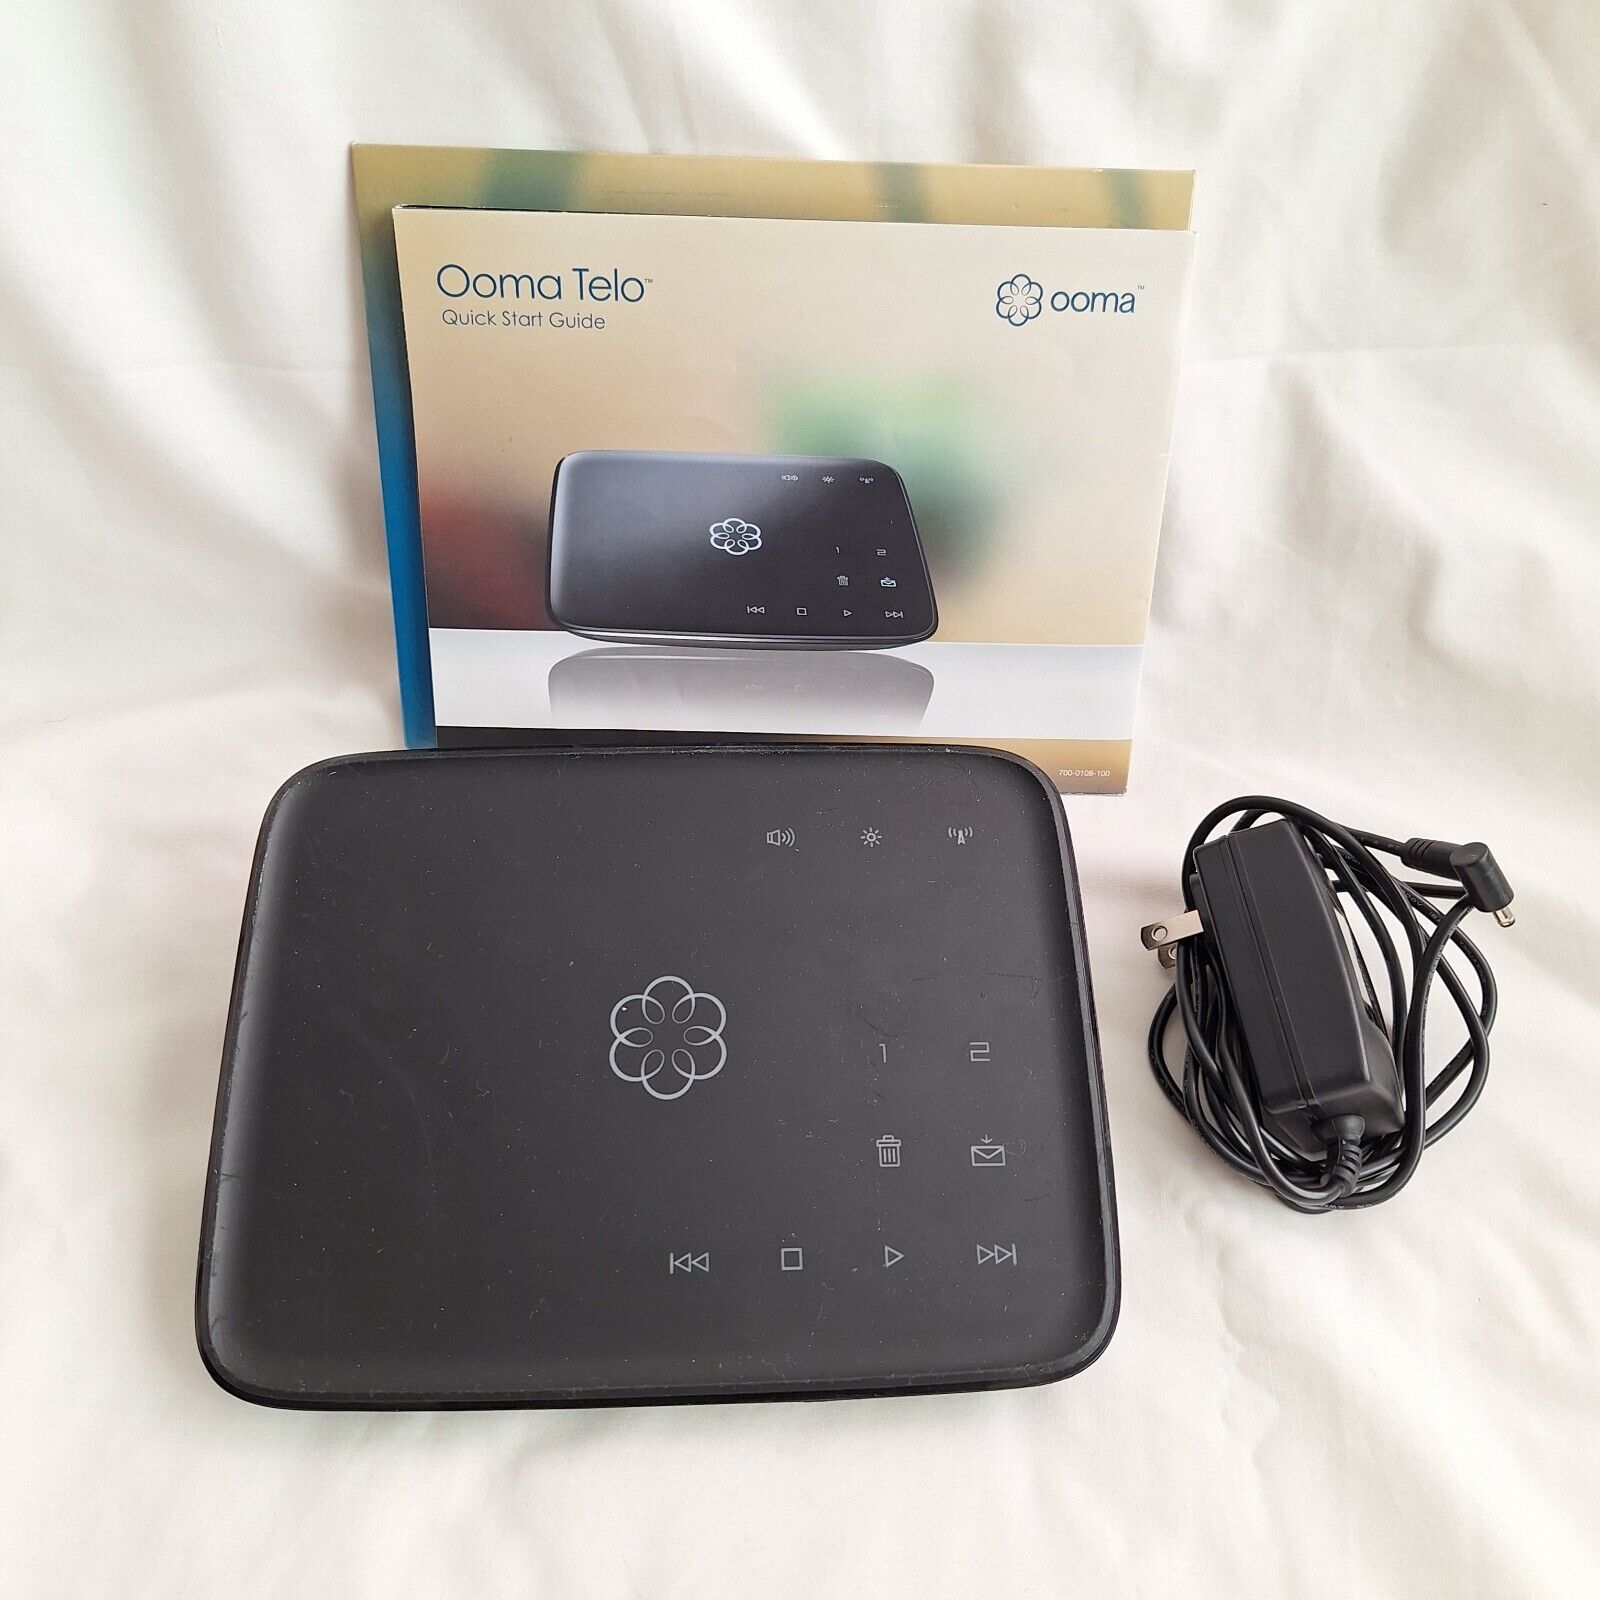 Ooma Telo VOIP 110-0102-300 Home Internet Phone System with Power Supply